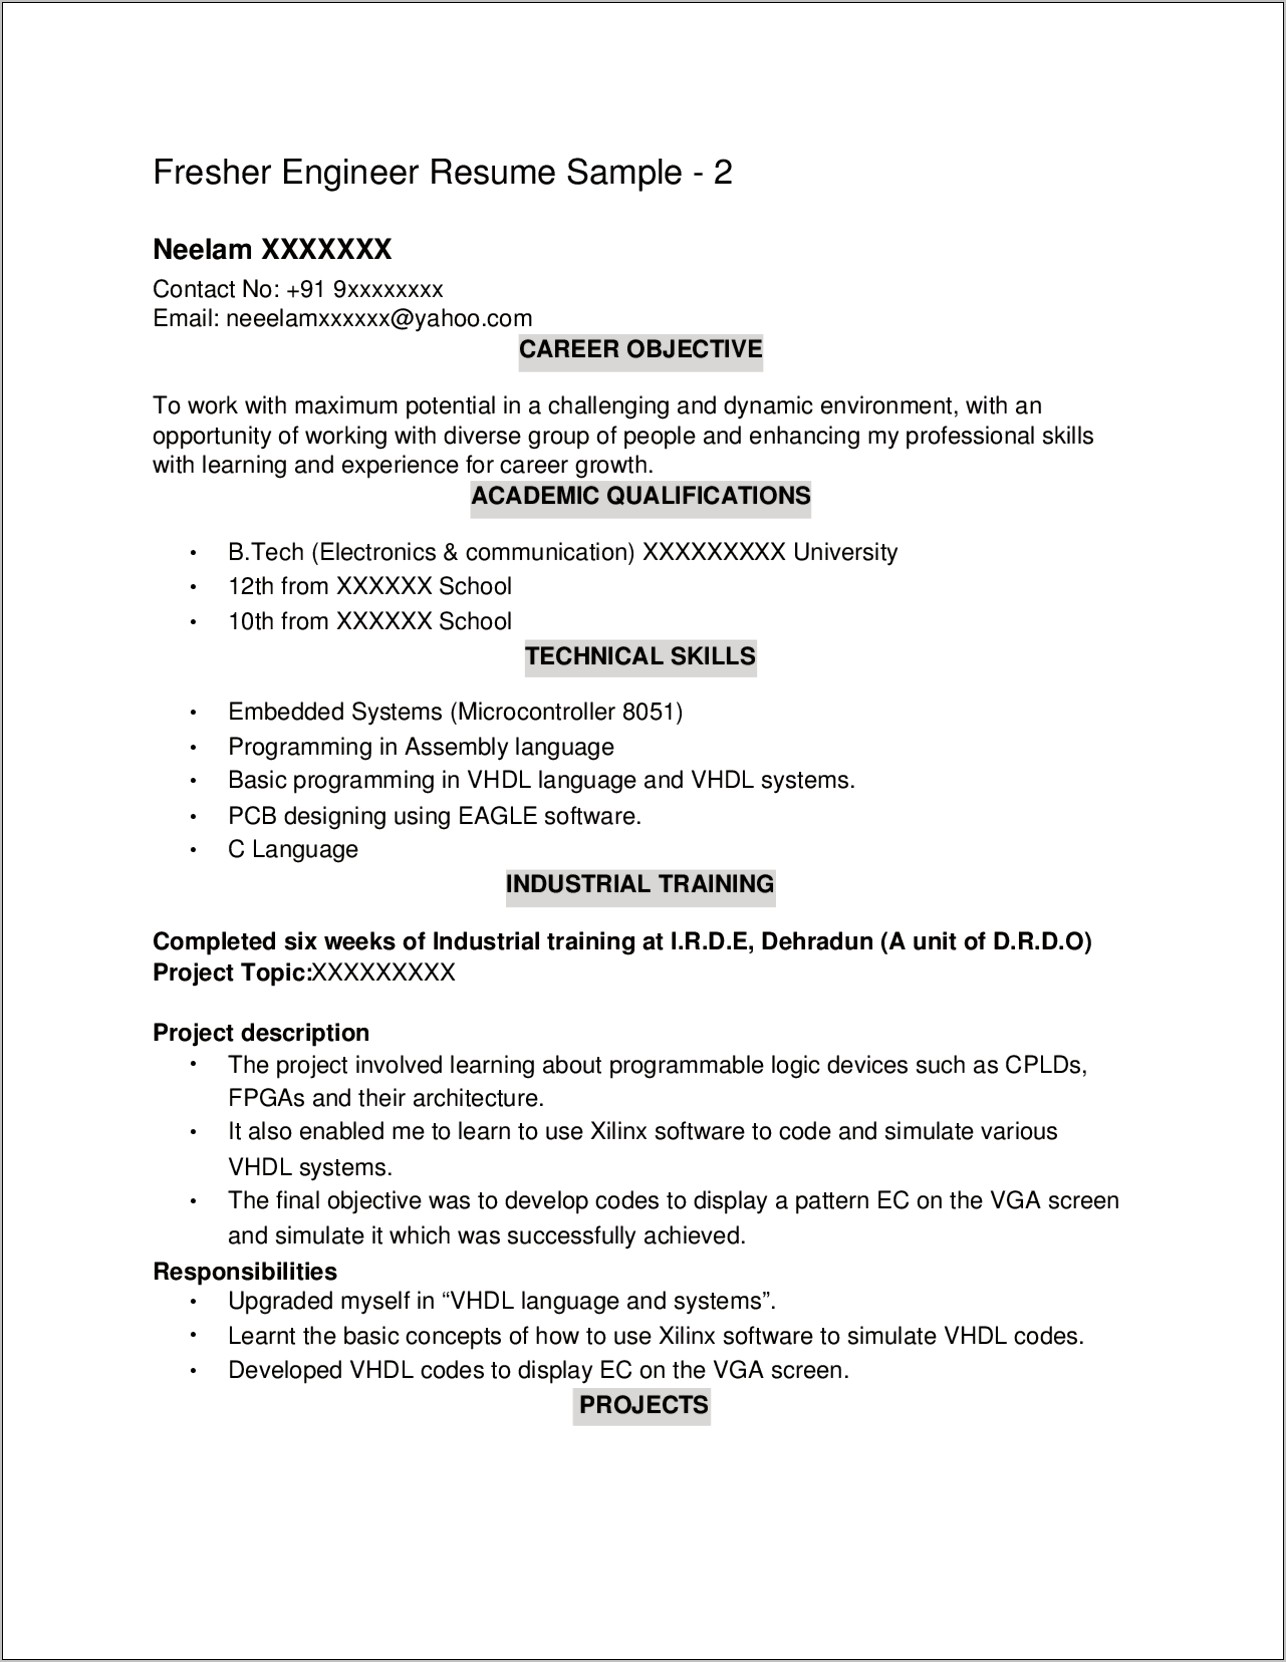 Skills And Abilities For Resume Yahoo